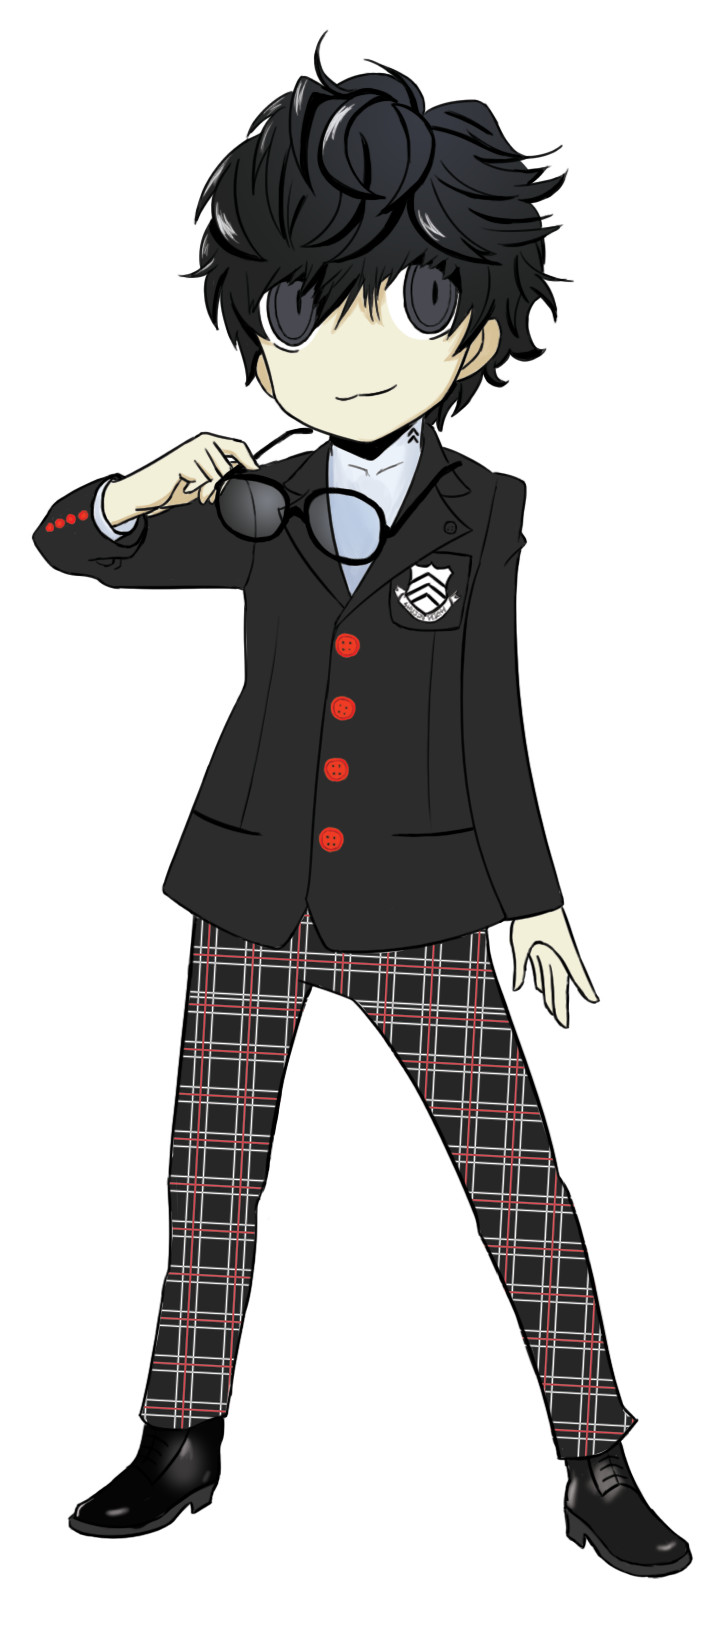 Persona Q Haru : Haru okumura is a playable character from persona 5 ...